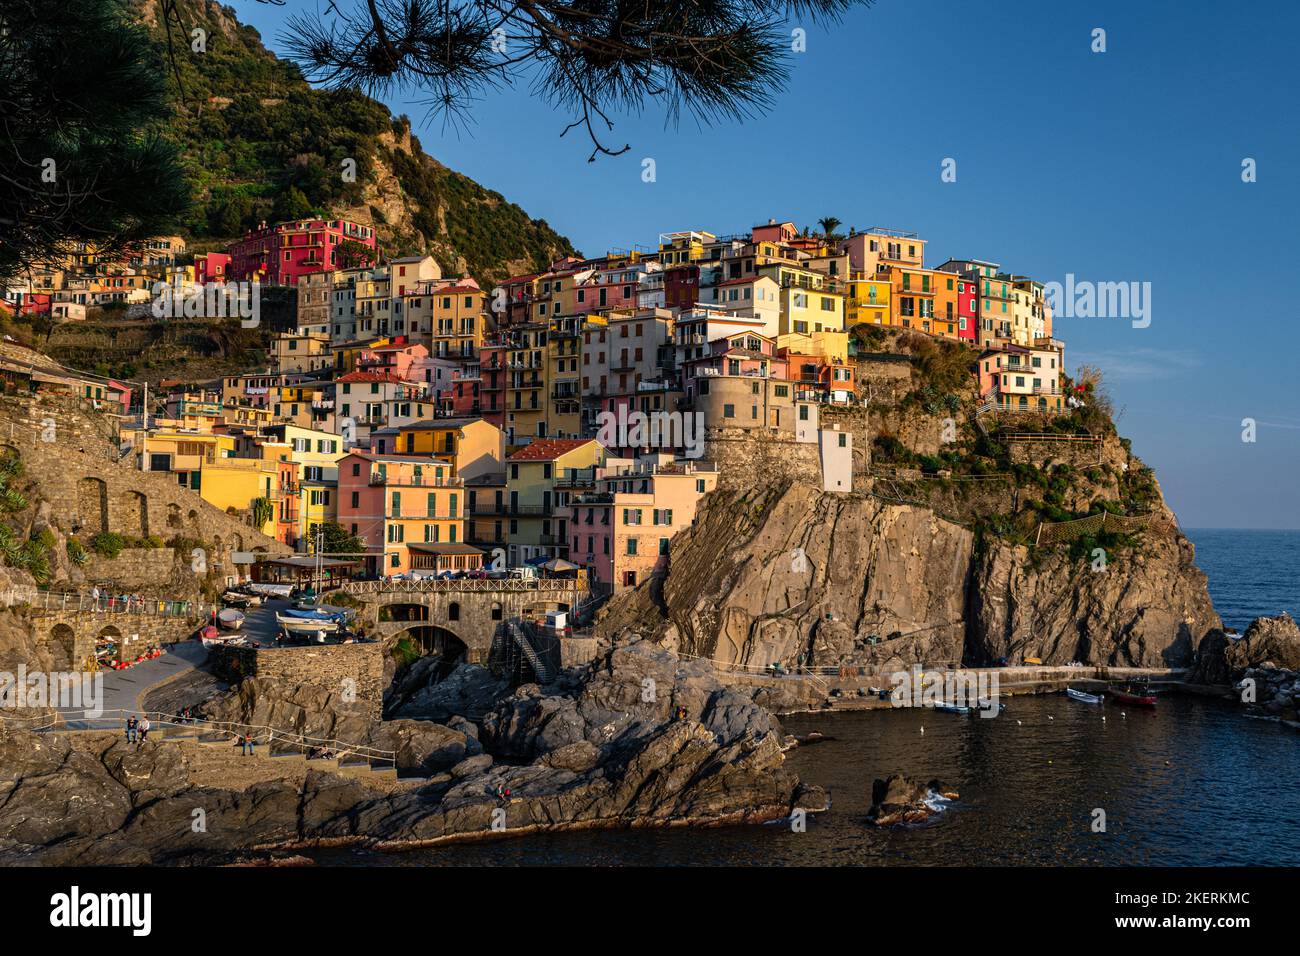 A beautiful view of the Italian village Manarola with blue sky and colorful buildings. Stock Photo